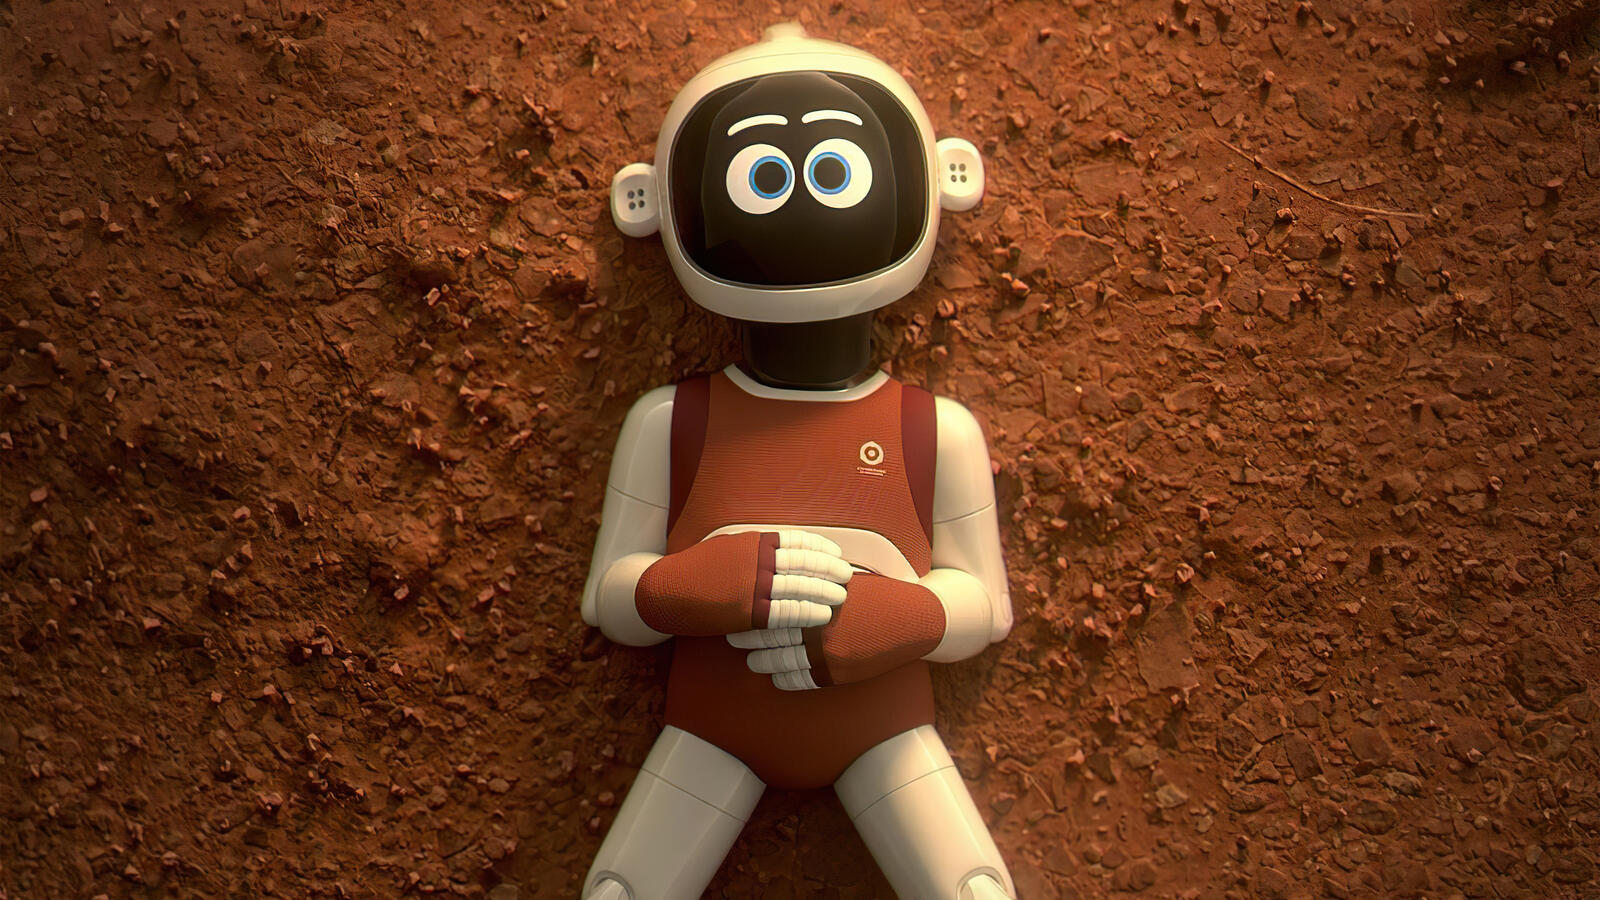 Free photo The mono mars robot is lying on the ground